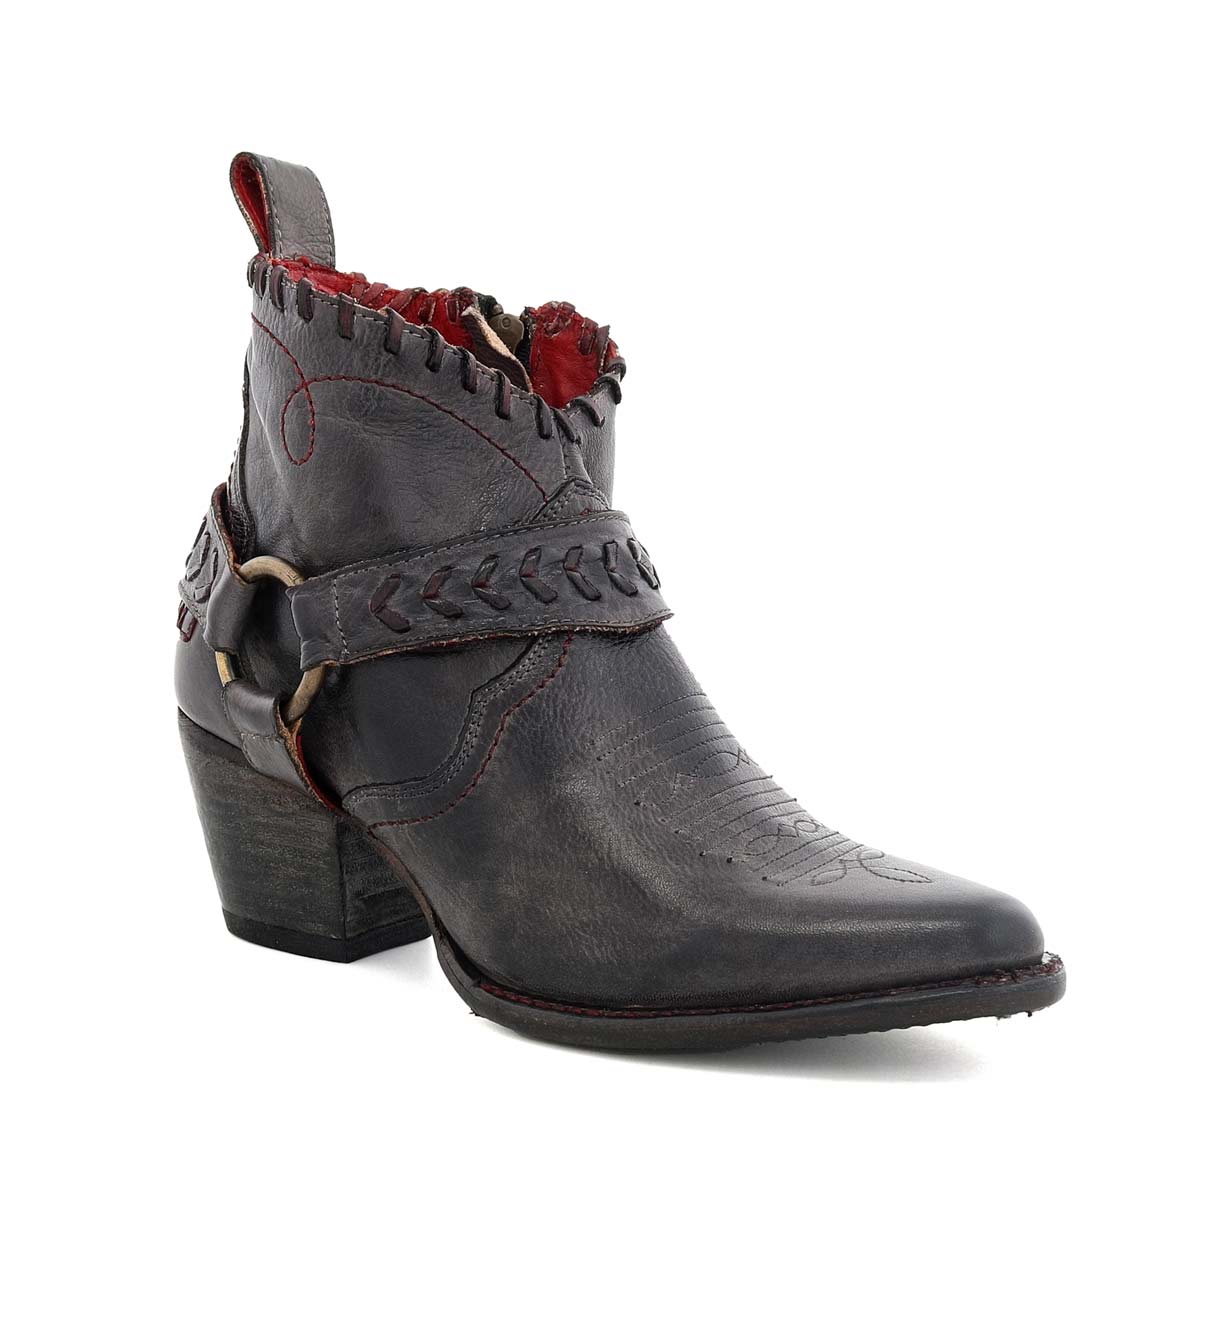 A women's Tania cowboy boot with a red strap by Bed Stu.